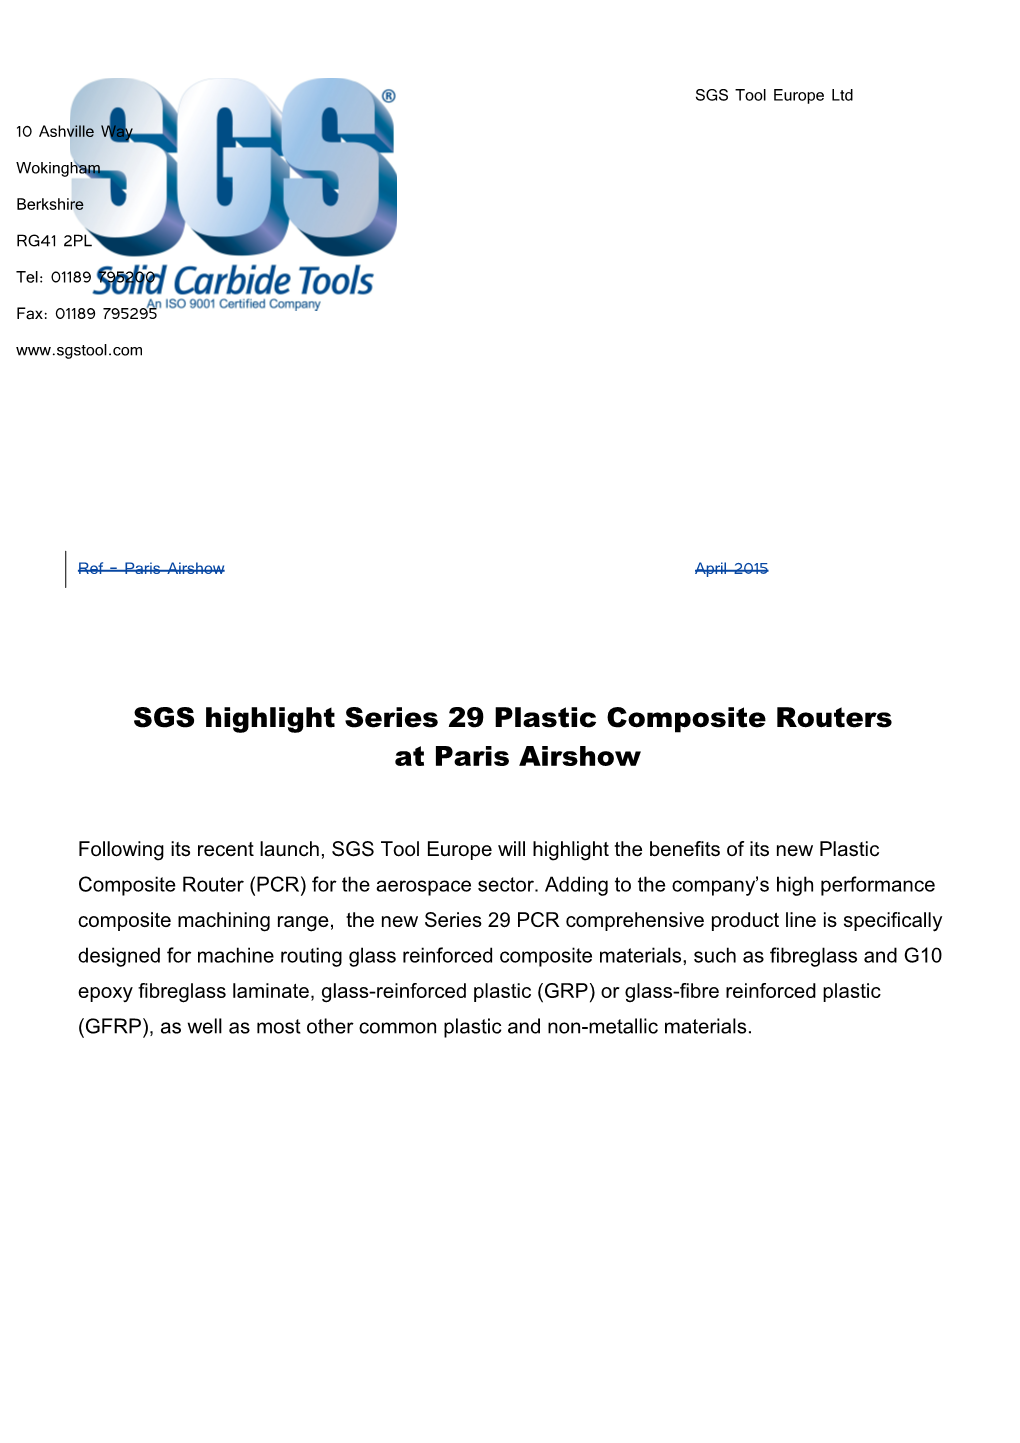 SGS Highlight Series 29Plastic Composite Routers